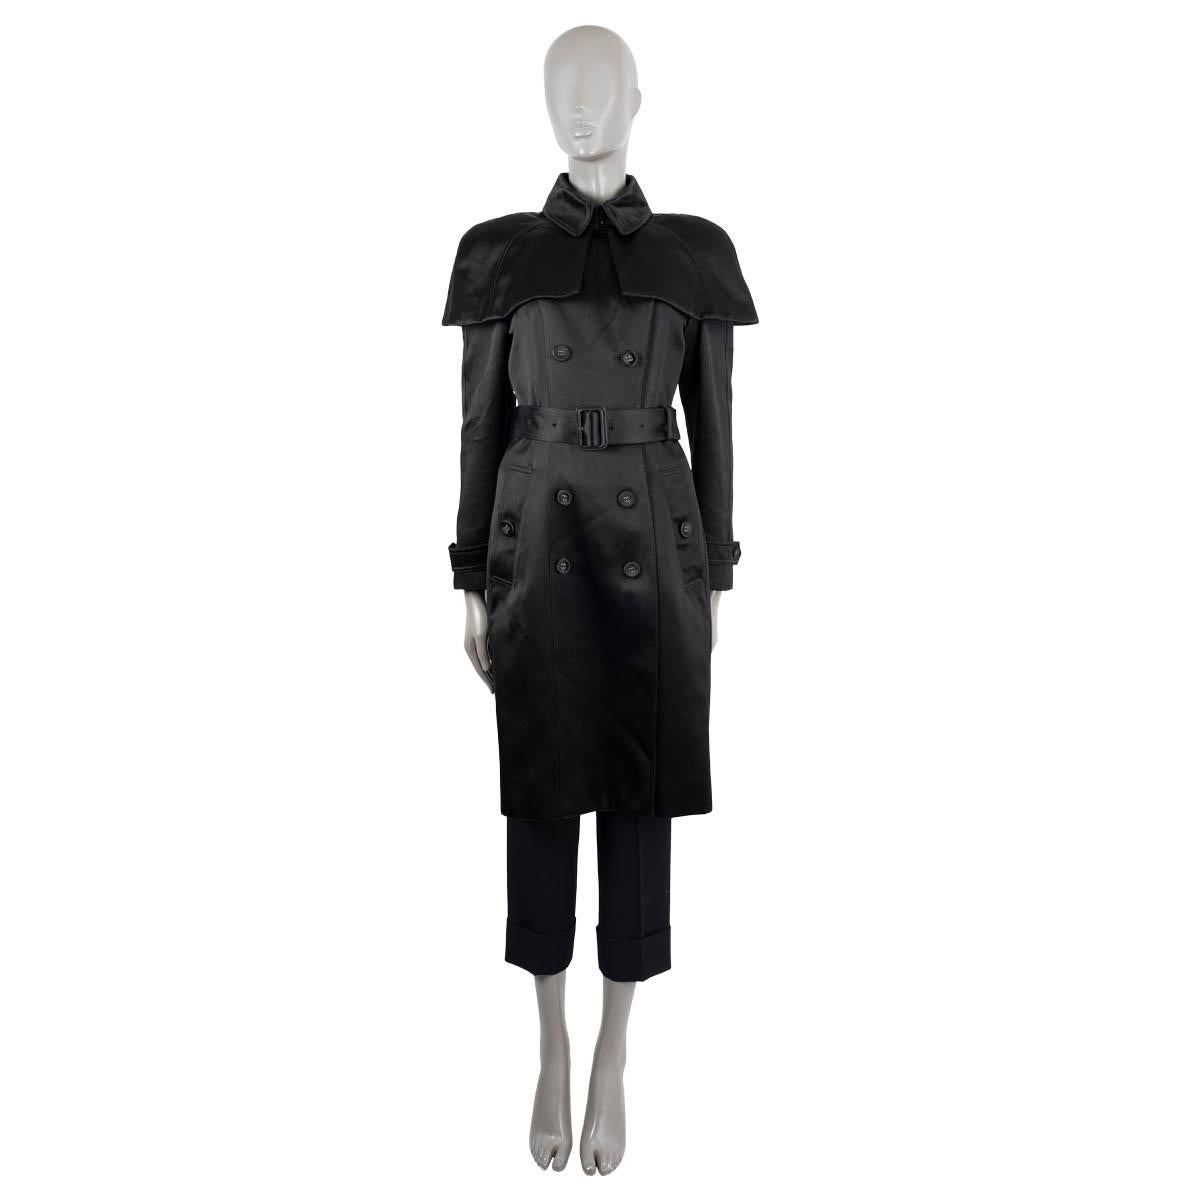 100% authentic Burberry double breasted caped trench coat in black  viscose (68%) and silk (32%) Duchess satin. Features epaulettes on the shoulders and cuffs and a detachable belt. Closes with one hook and one button at the neck and buttons on the